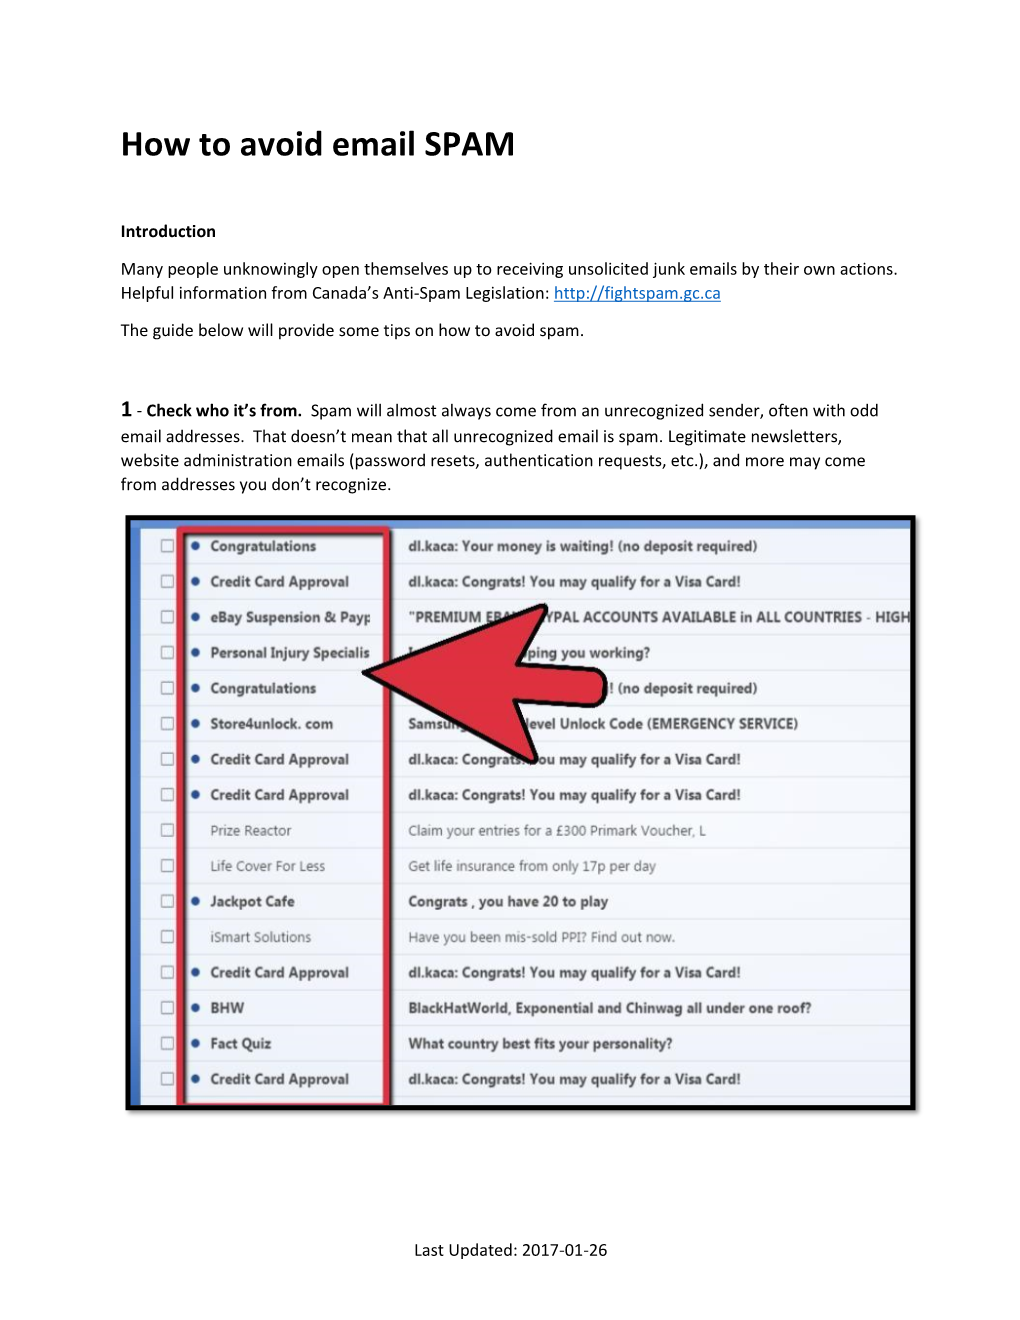 How to Avoid Email SPAM